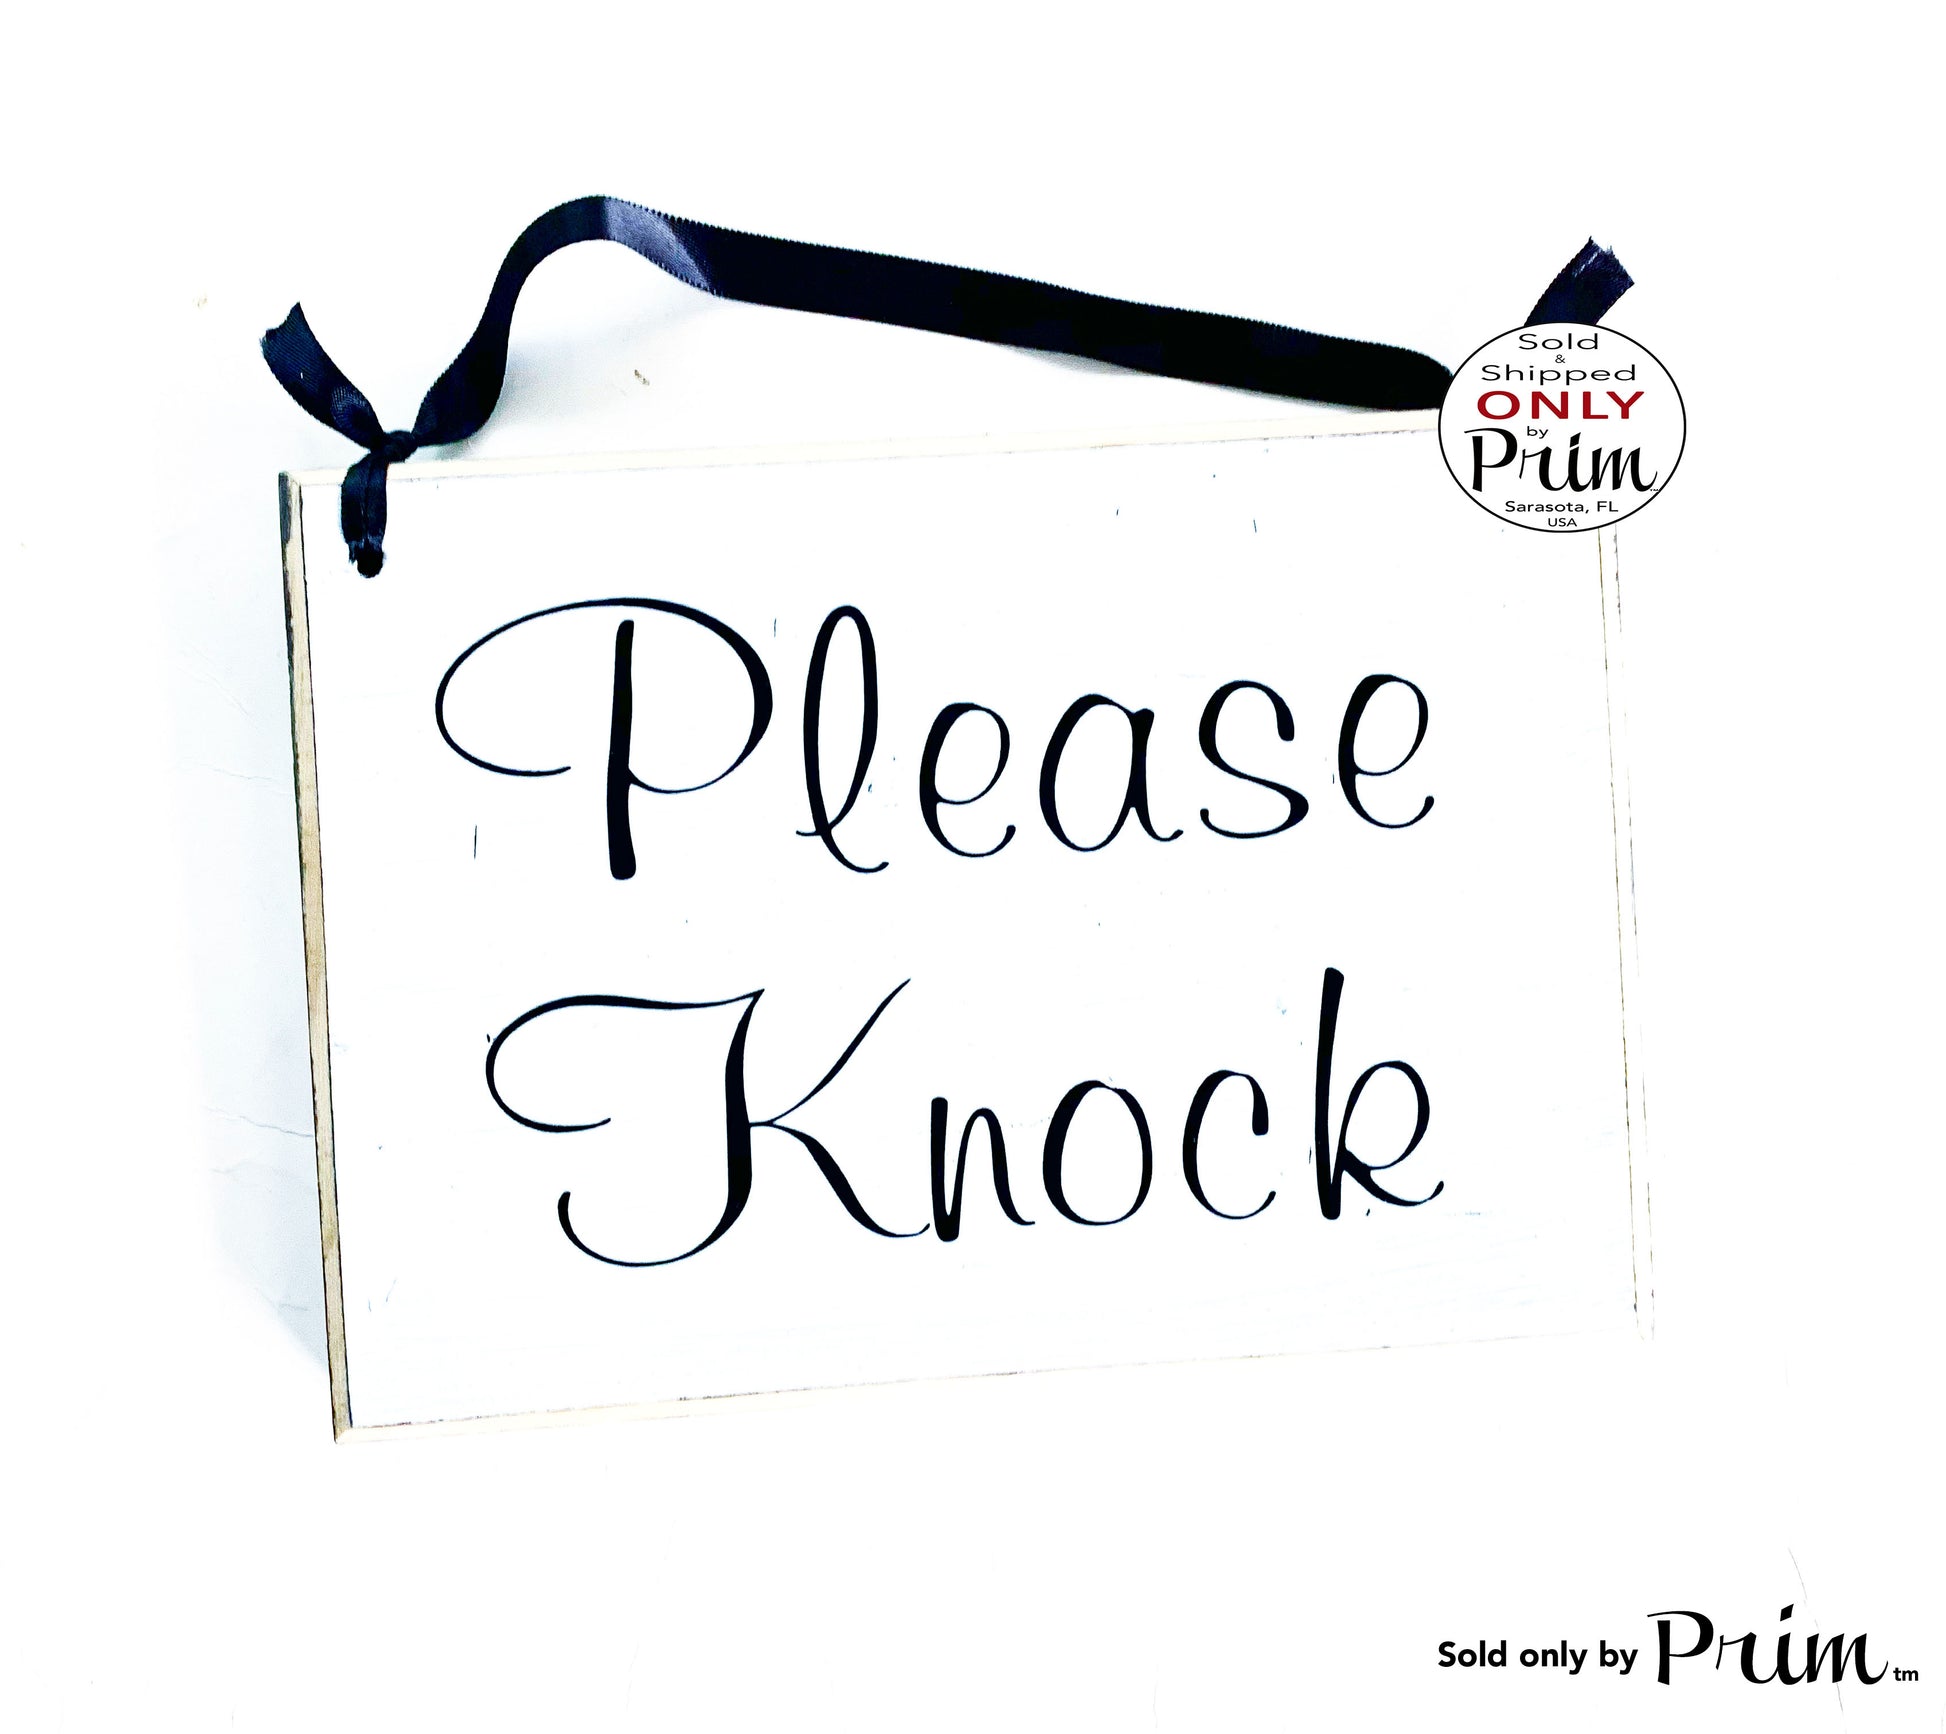 8x6 Please Knock Custom Wood Sign Please Do Not Disturb Office Salon Spa Meeting Phone Call Welcome Wall Decor Hanger Door Plaque Designs by Prim